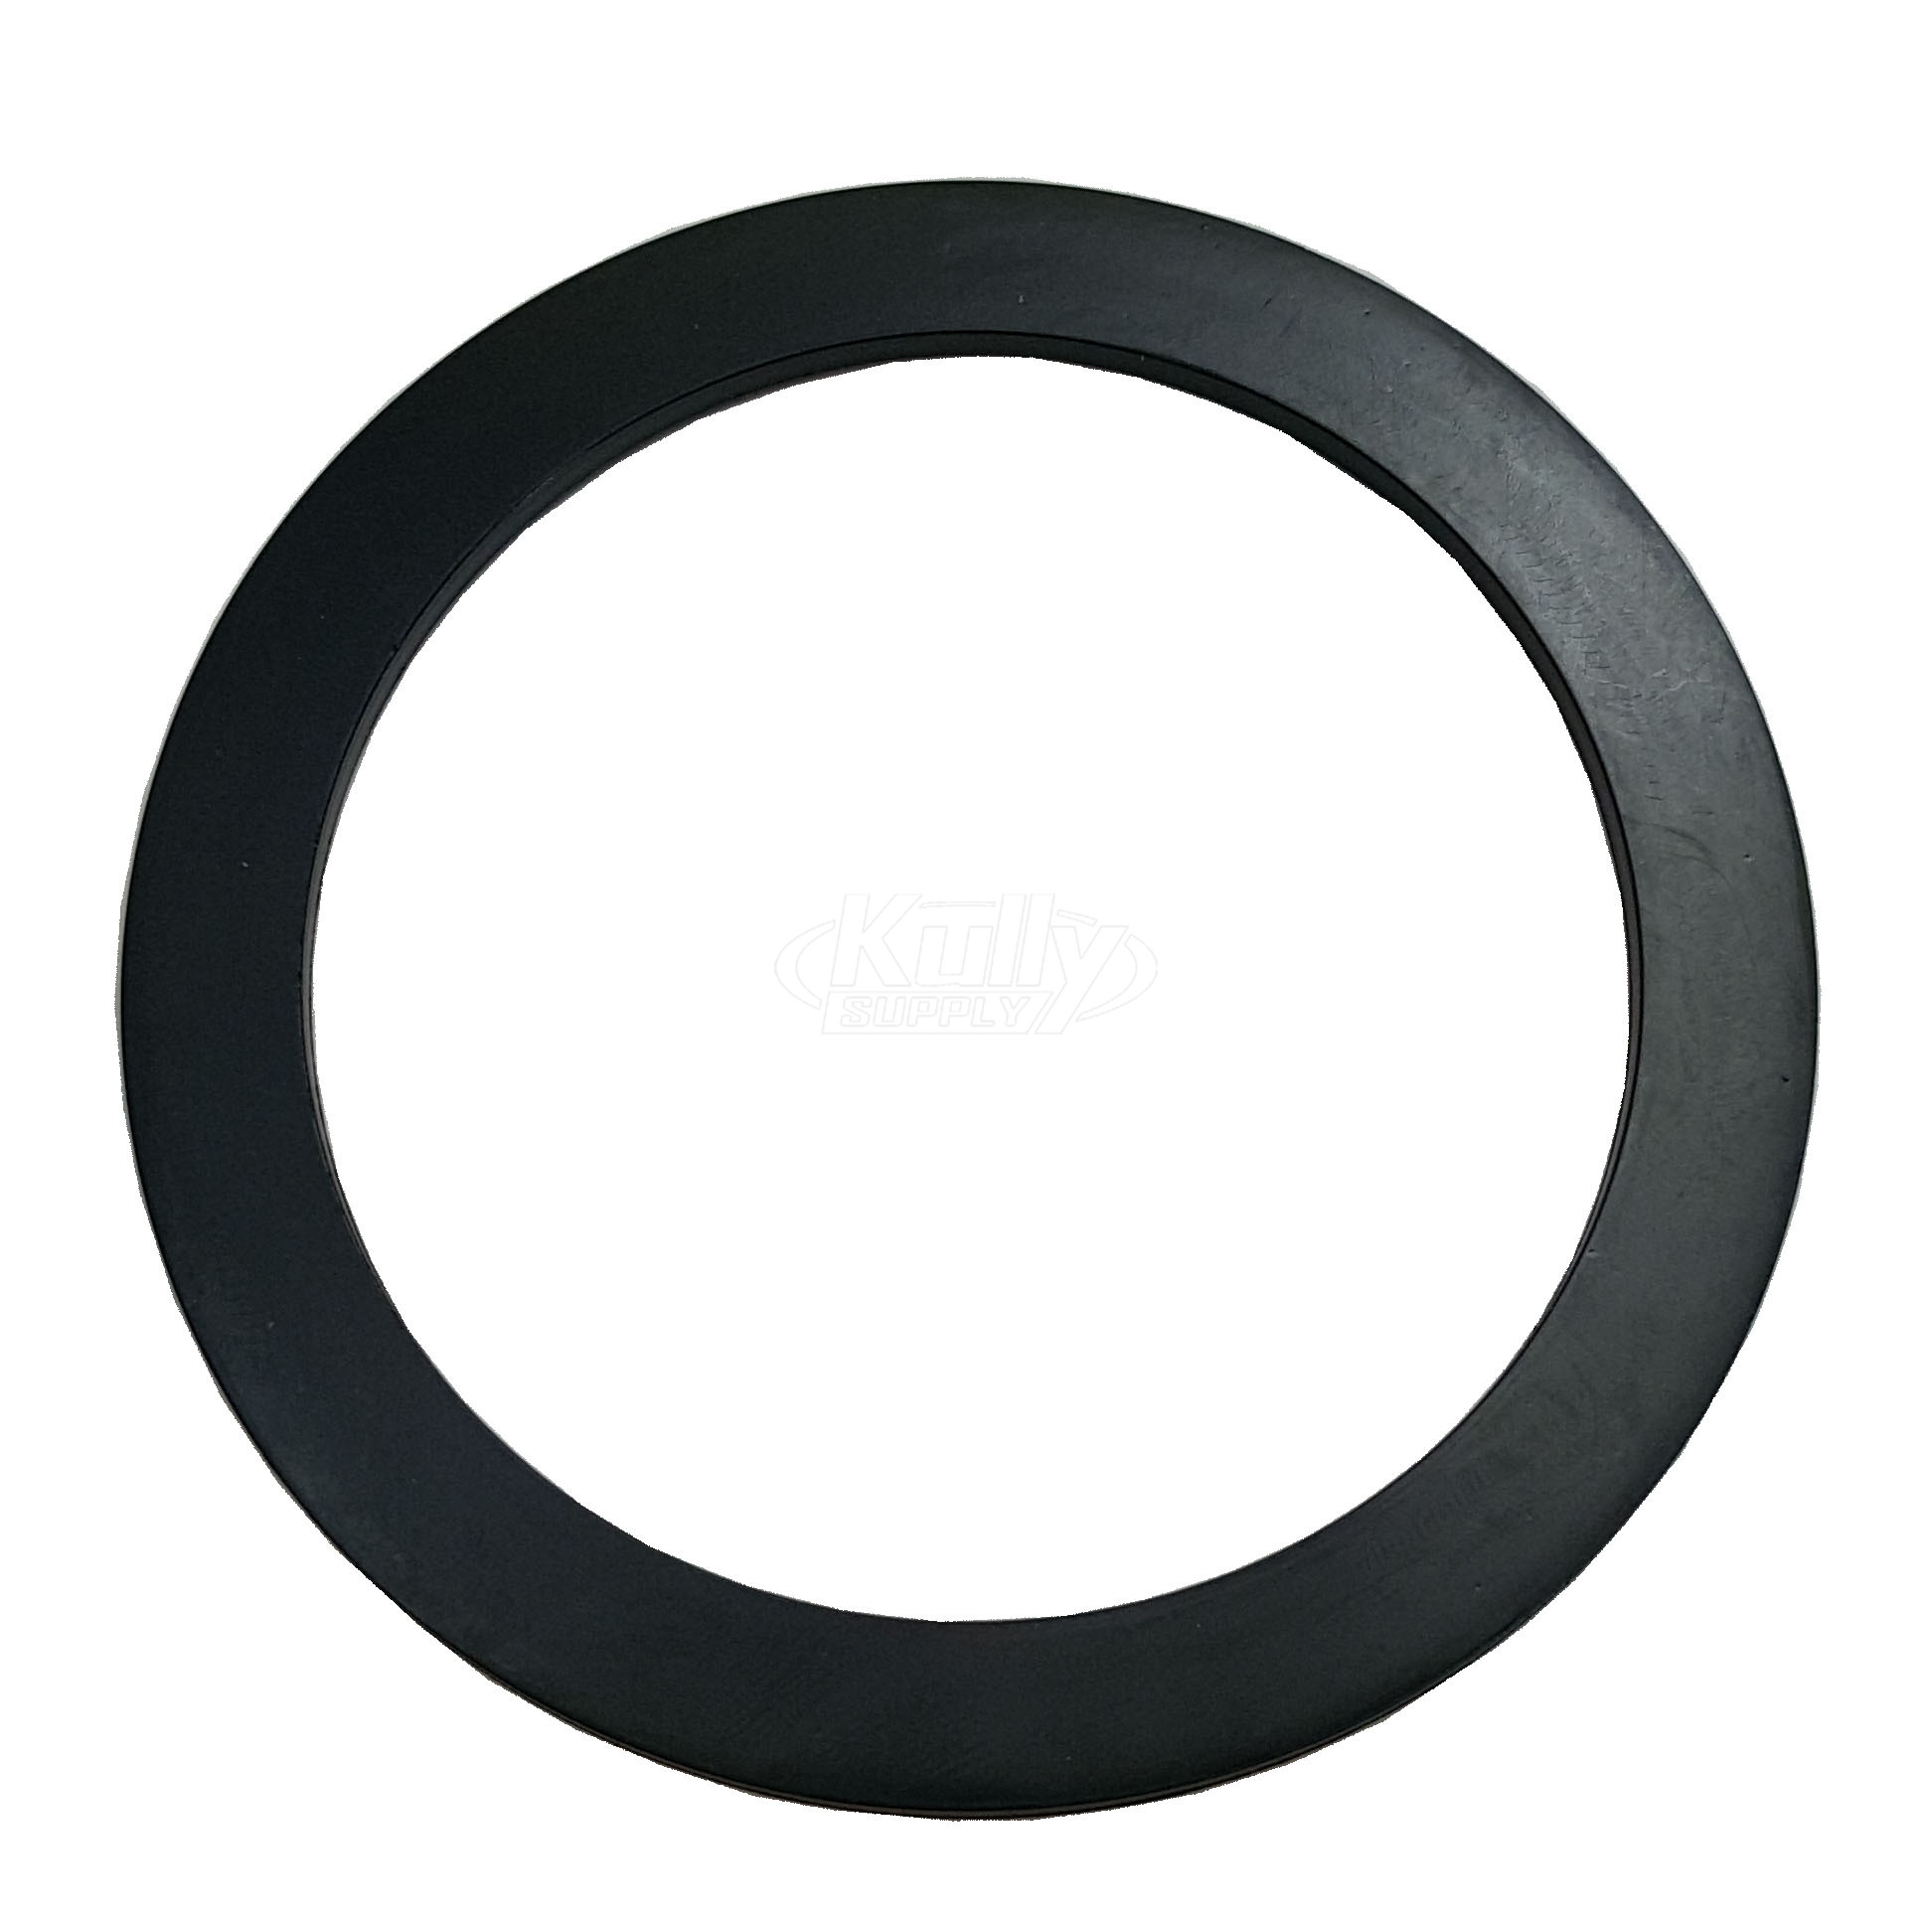 T&S Brass 010382-45 Face Flange Gasket for 3 1/2" Rotary Waste Valve